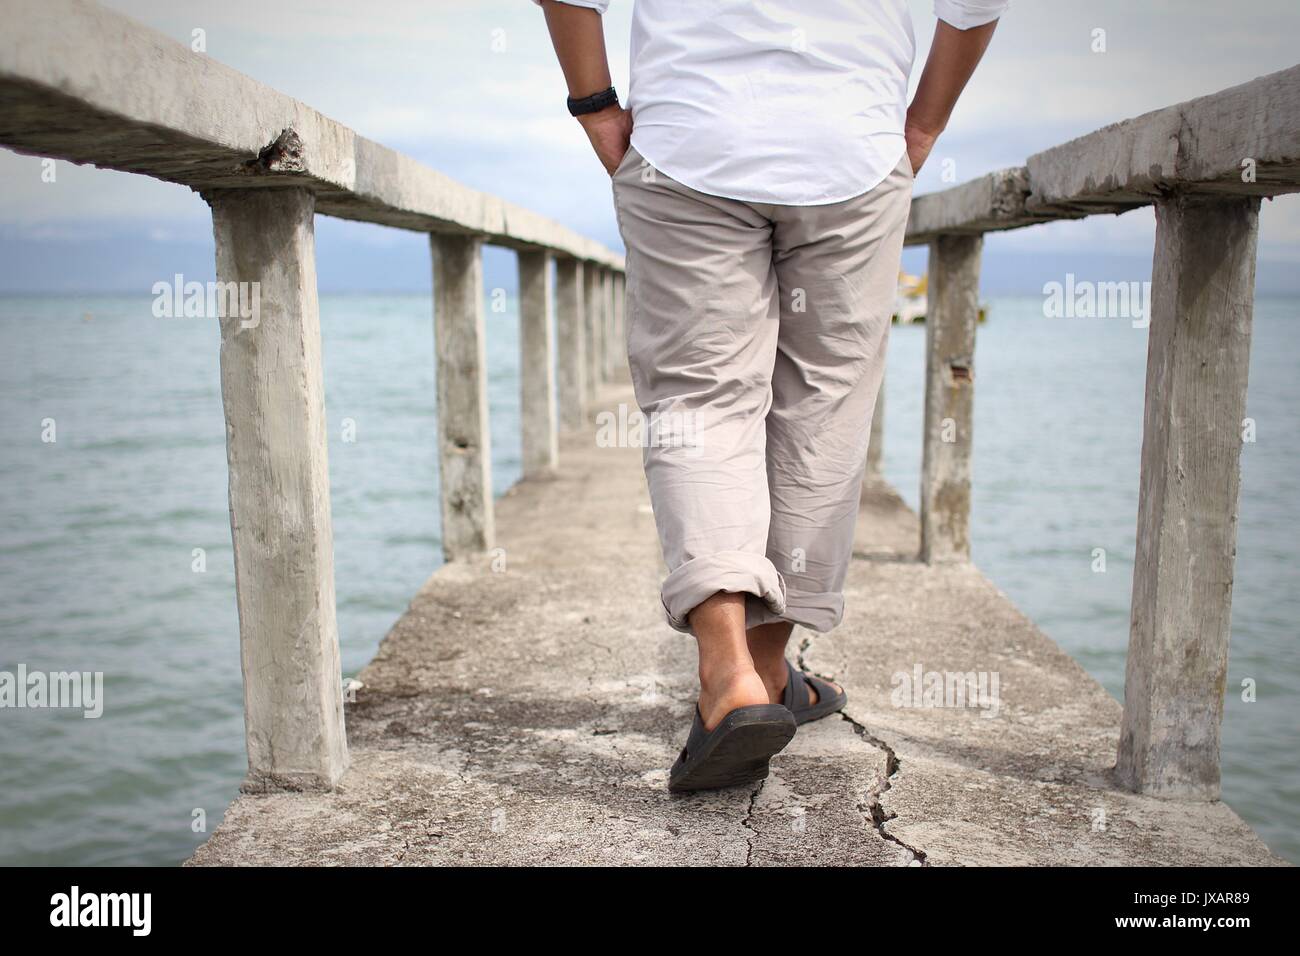 A man walking on a concrete bridge with cracks. The sea and the sky are both visible in the picture. Stock Photo